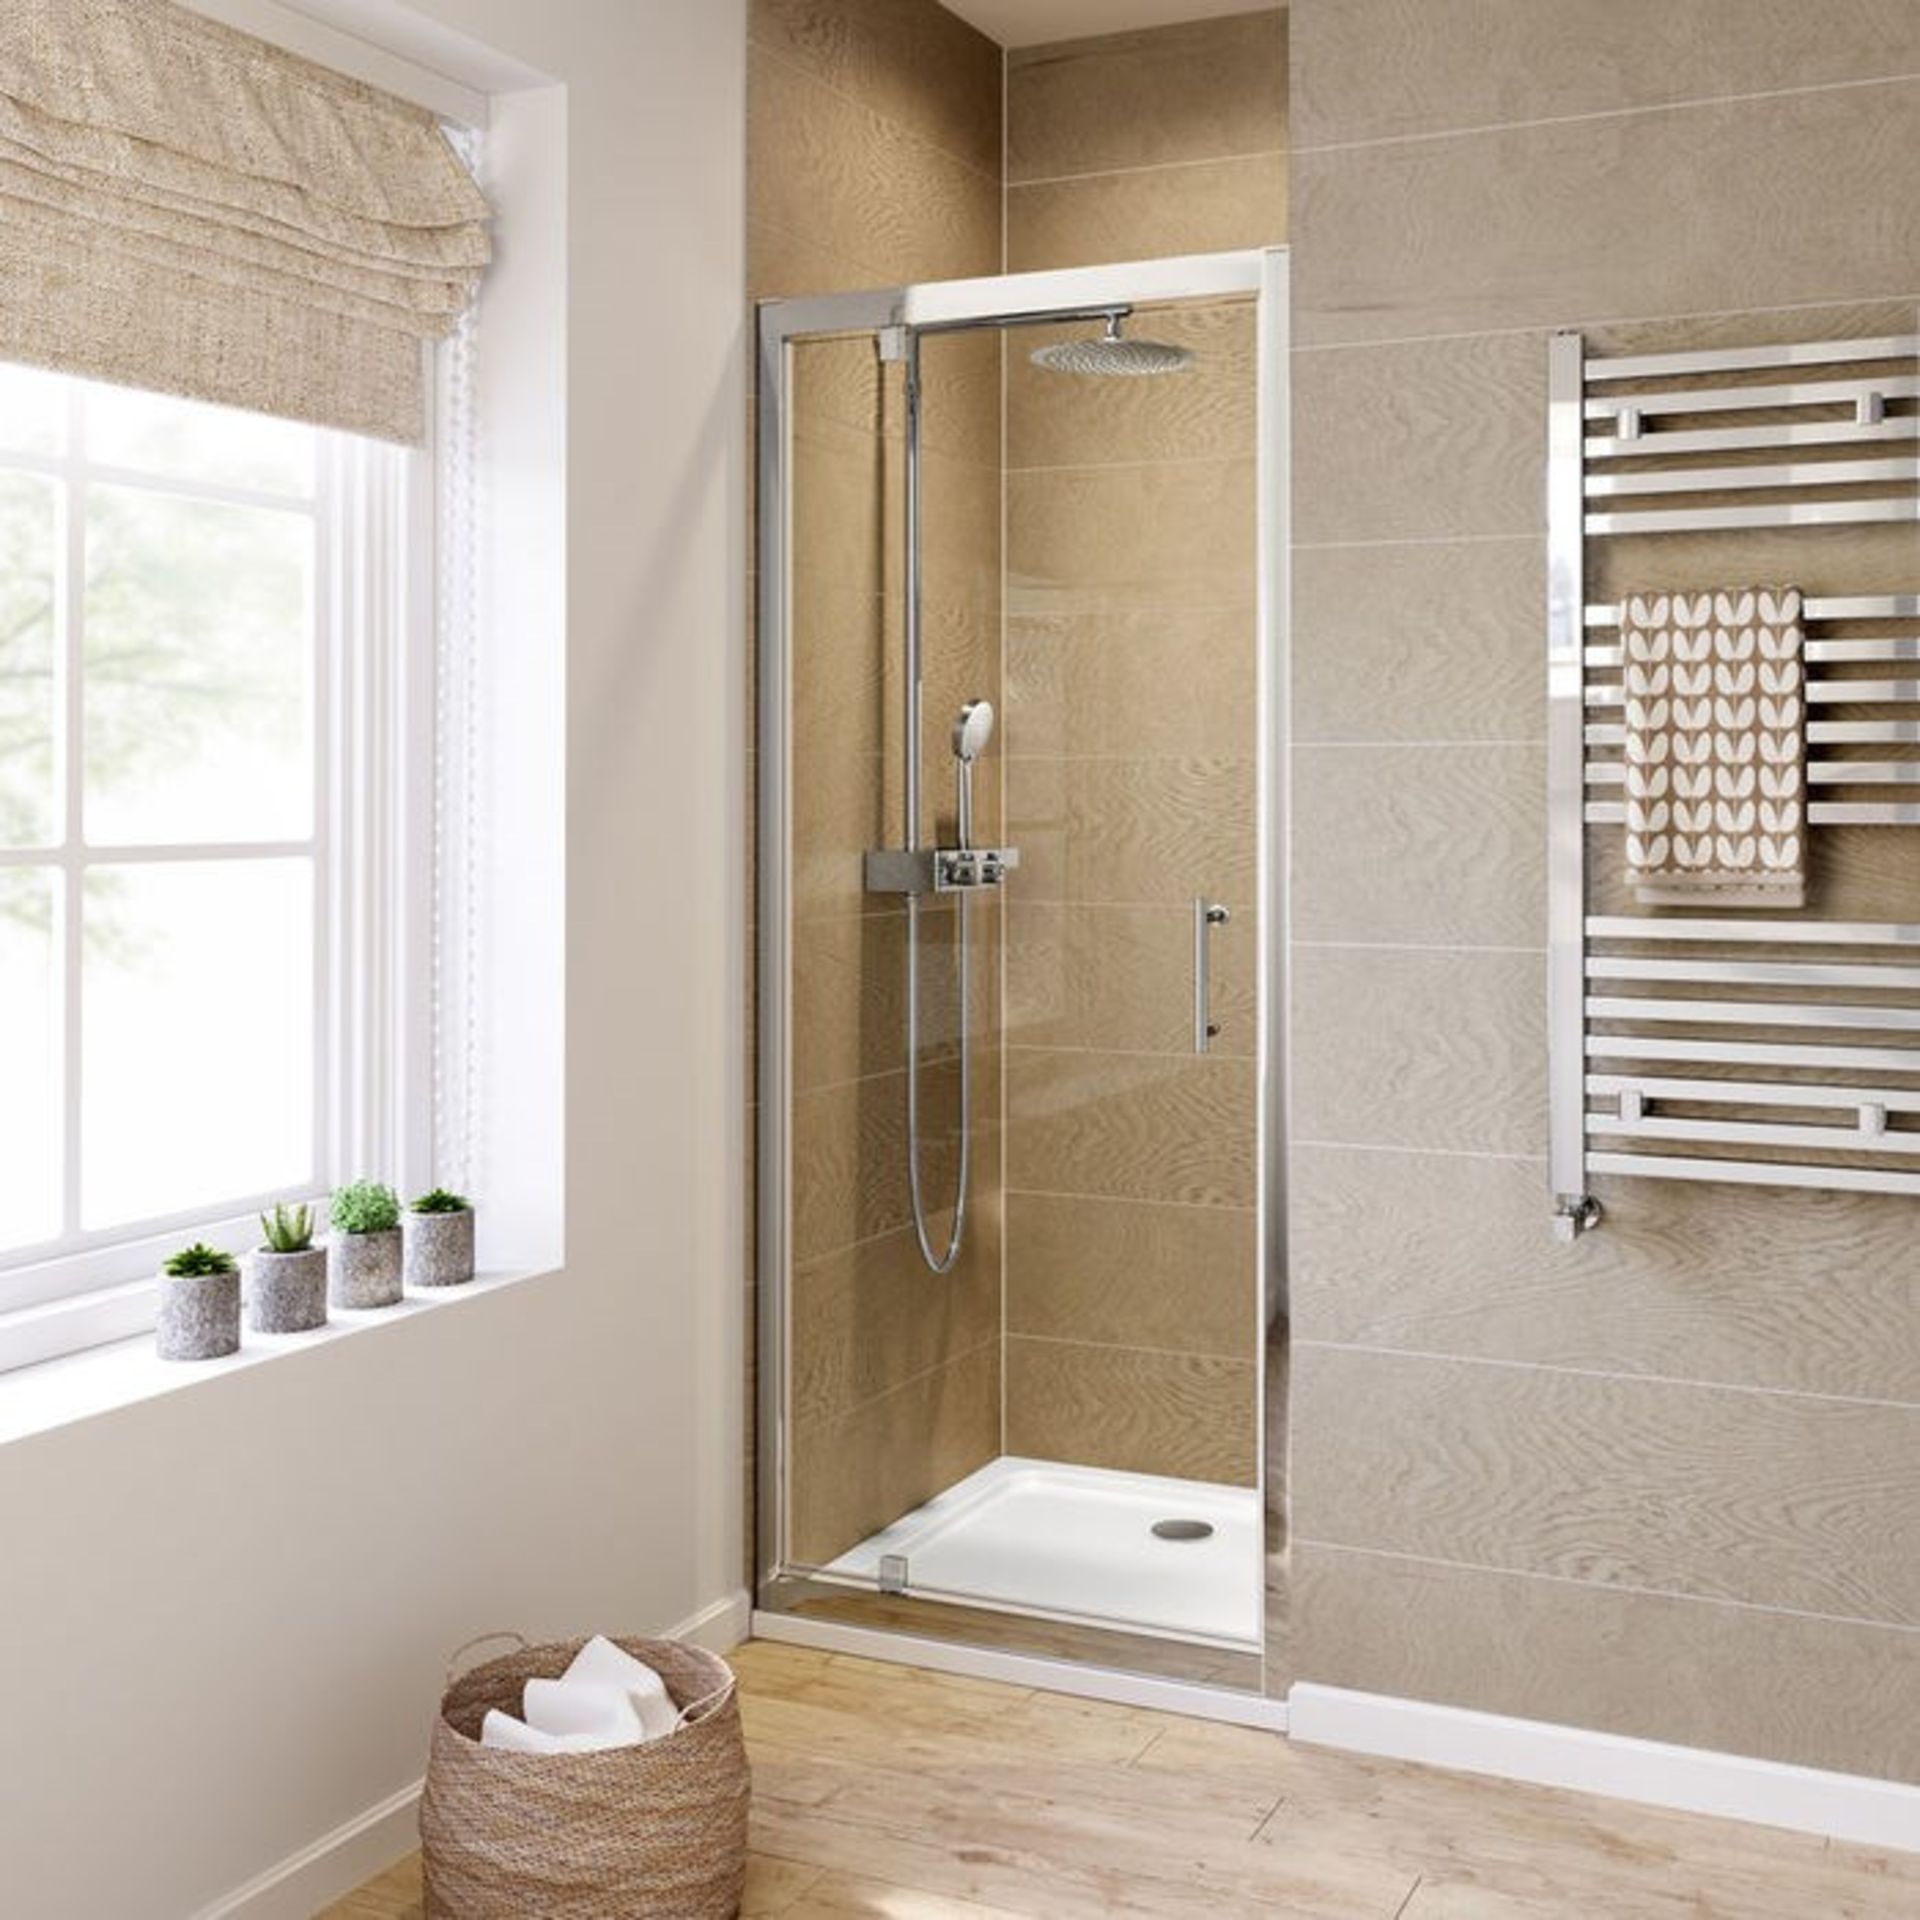 NEW & BOXED Twyfords 700mm - 6mm - Premium Pivot Shower Door. RRP £299.99.8mm Safety Glass Ful...